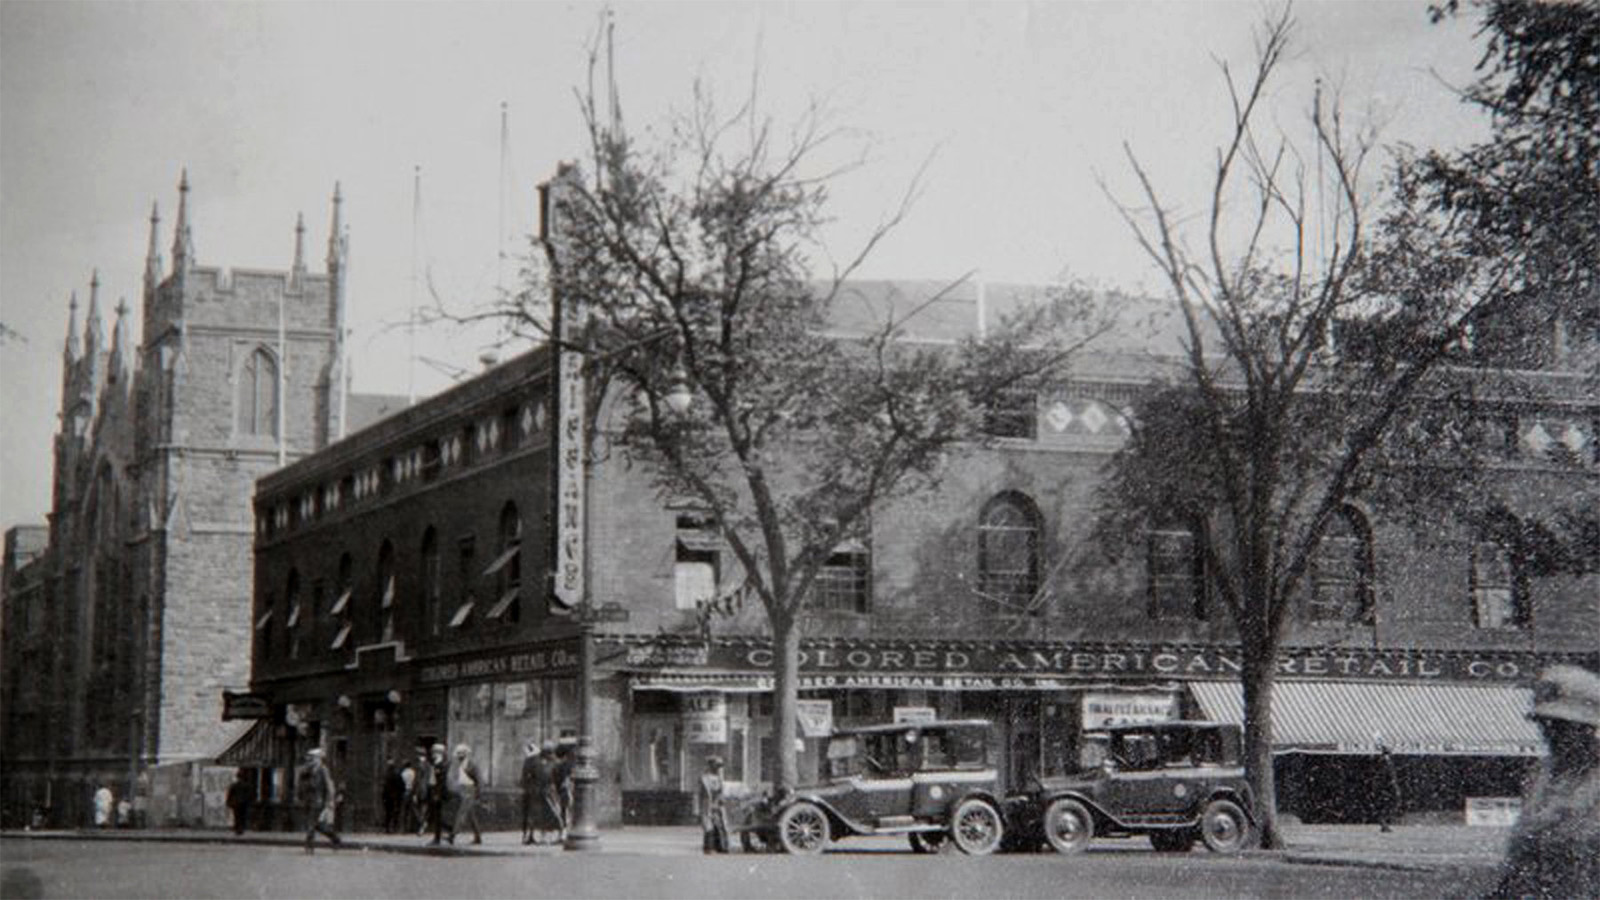    A black-and-white exterior photo of a large brick building on the corner of a street. Two old-fashioned vehicles are parked on the corner. Several pedestrians walk along the sidewalk next to the building. 